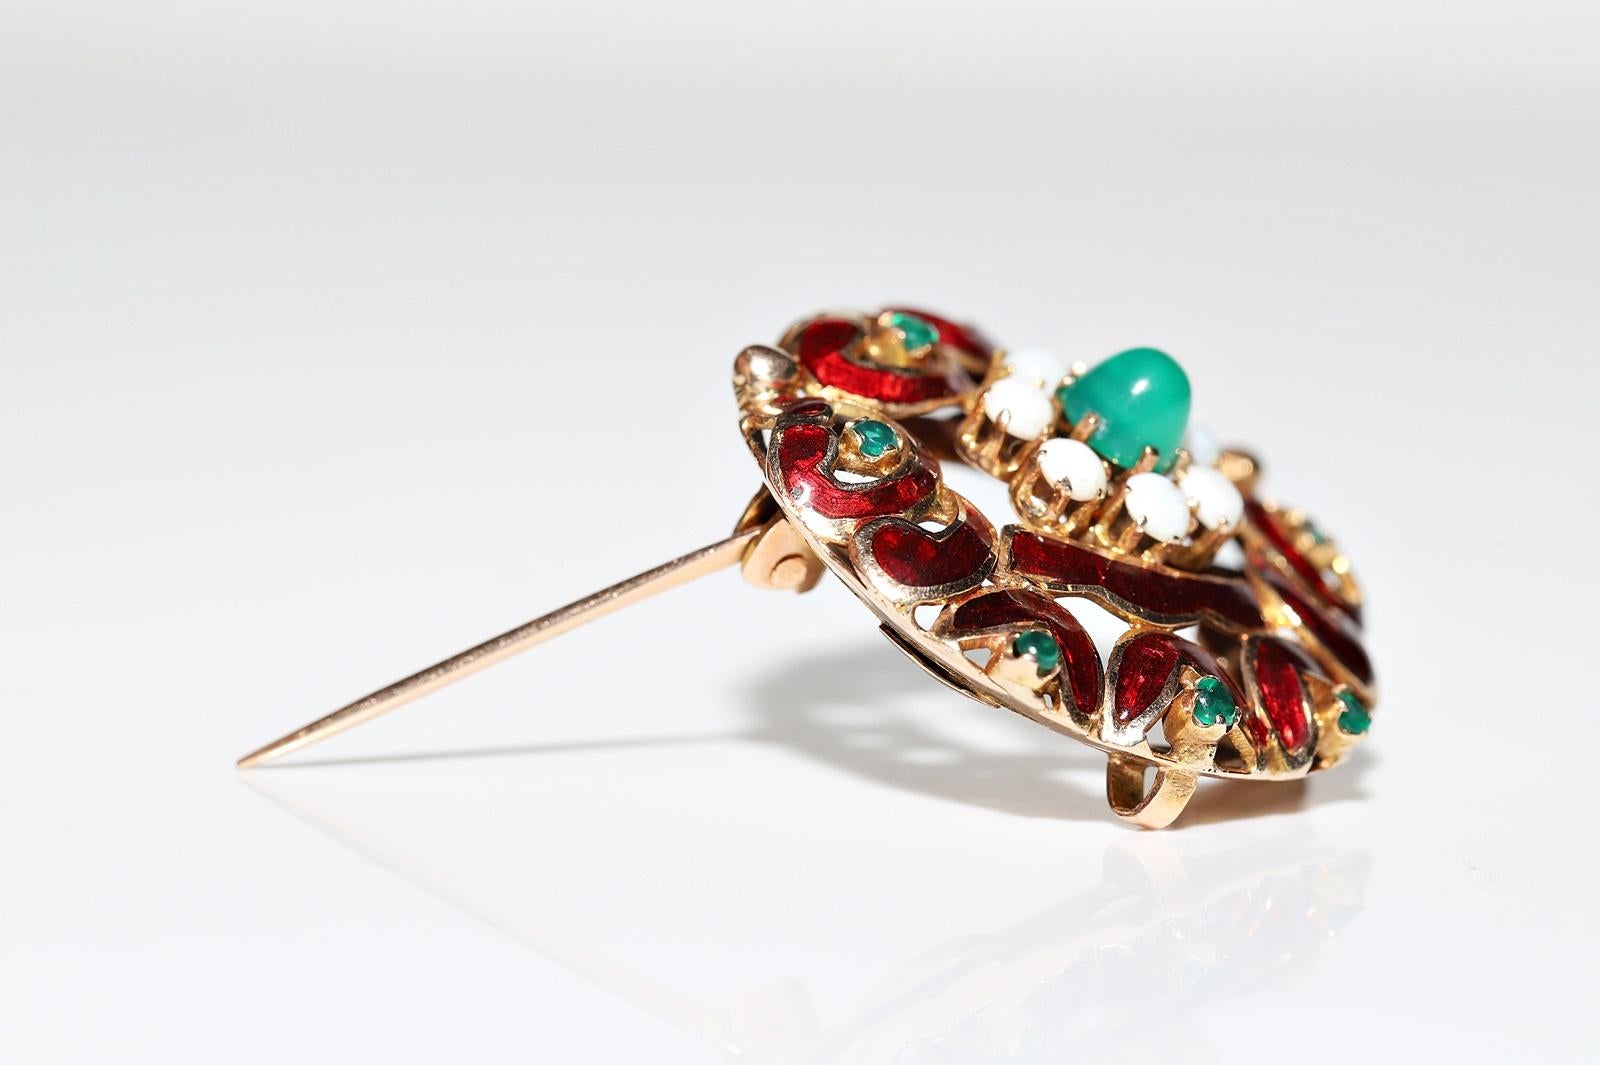 Cabochon Vintage Circa 1960s 14k Gold Natural Opal And Jade Decorated Enamel Brooch For Sale